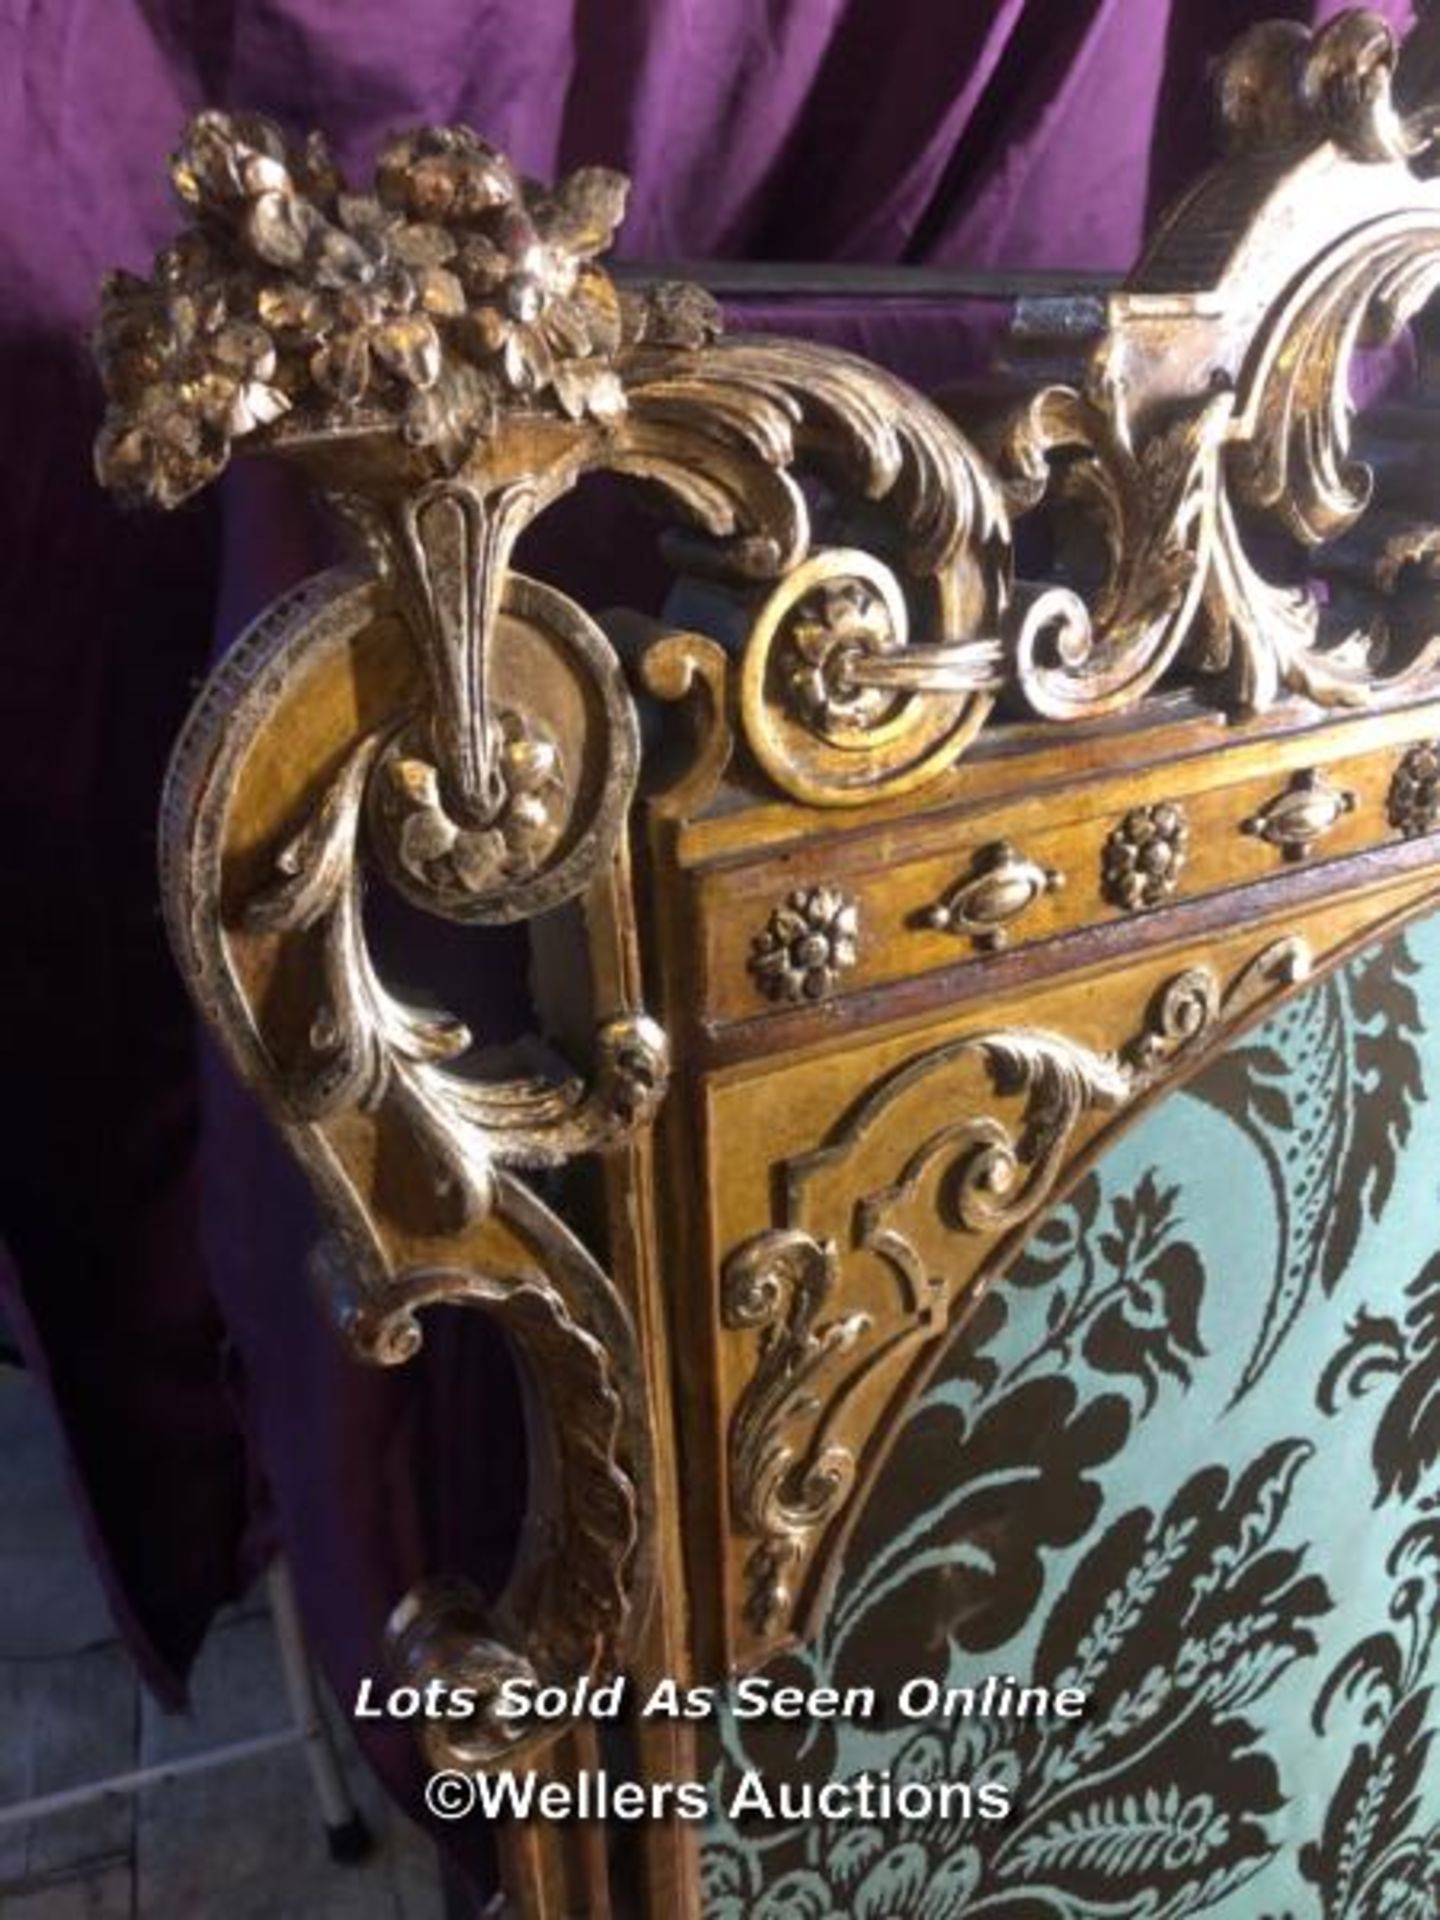 LARGE AND IMPRESSIVE FIRE SCREEN, ITALIAN ORIGIN, WITH EXTENSIVE CARVING AND GILDING, 88 X 40 X - Image 5 of 9